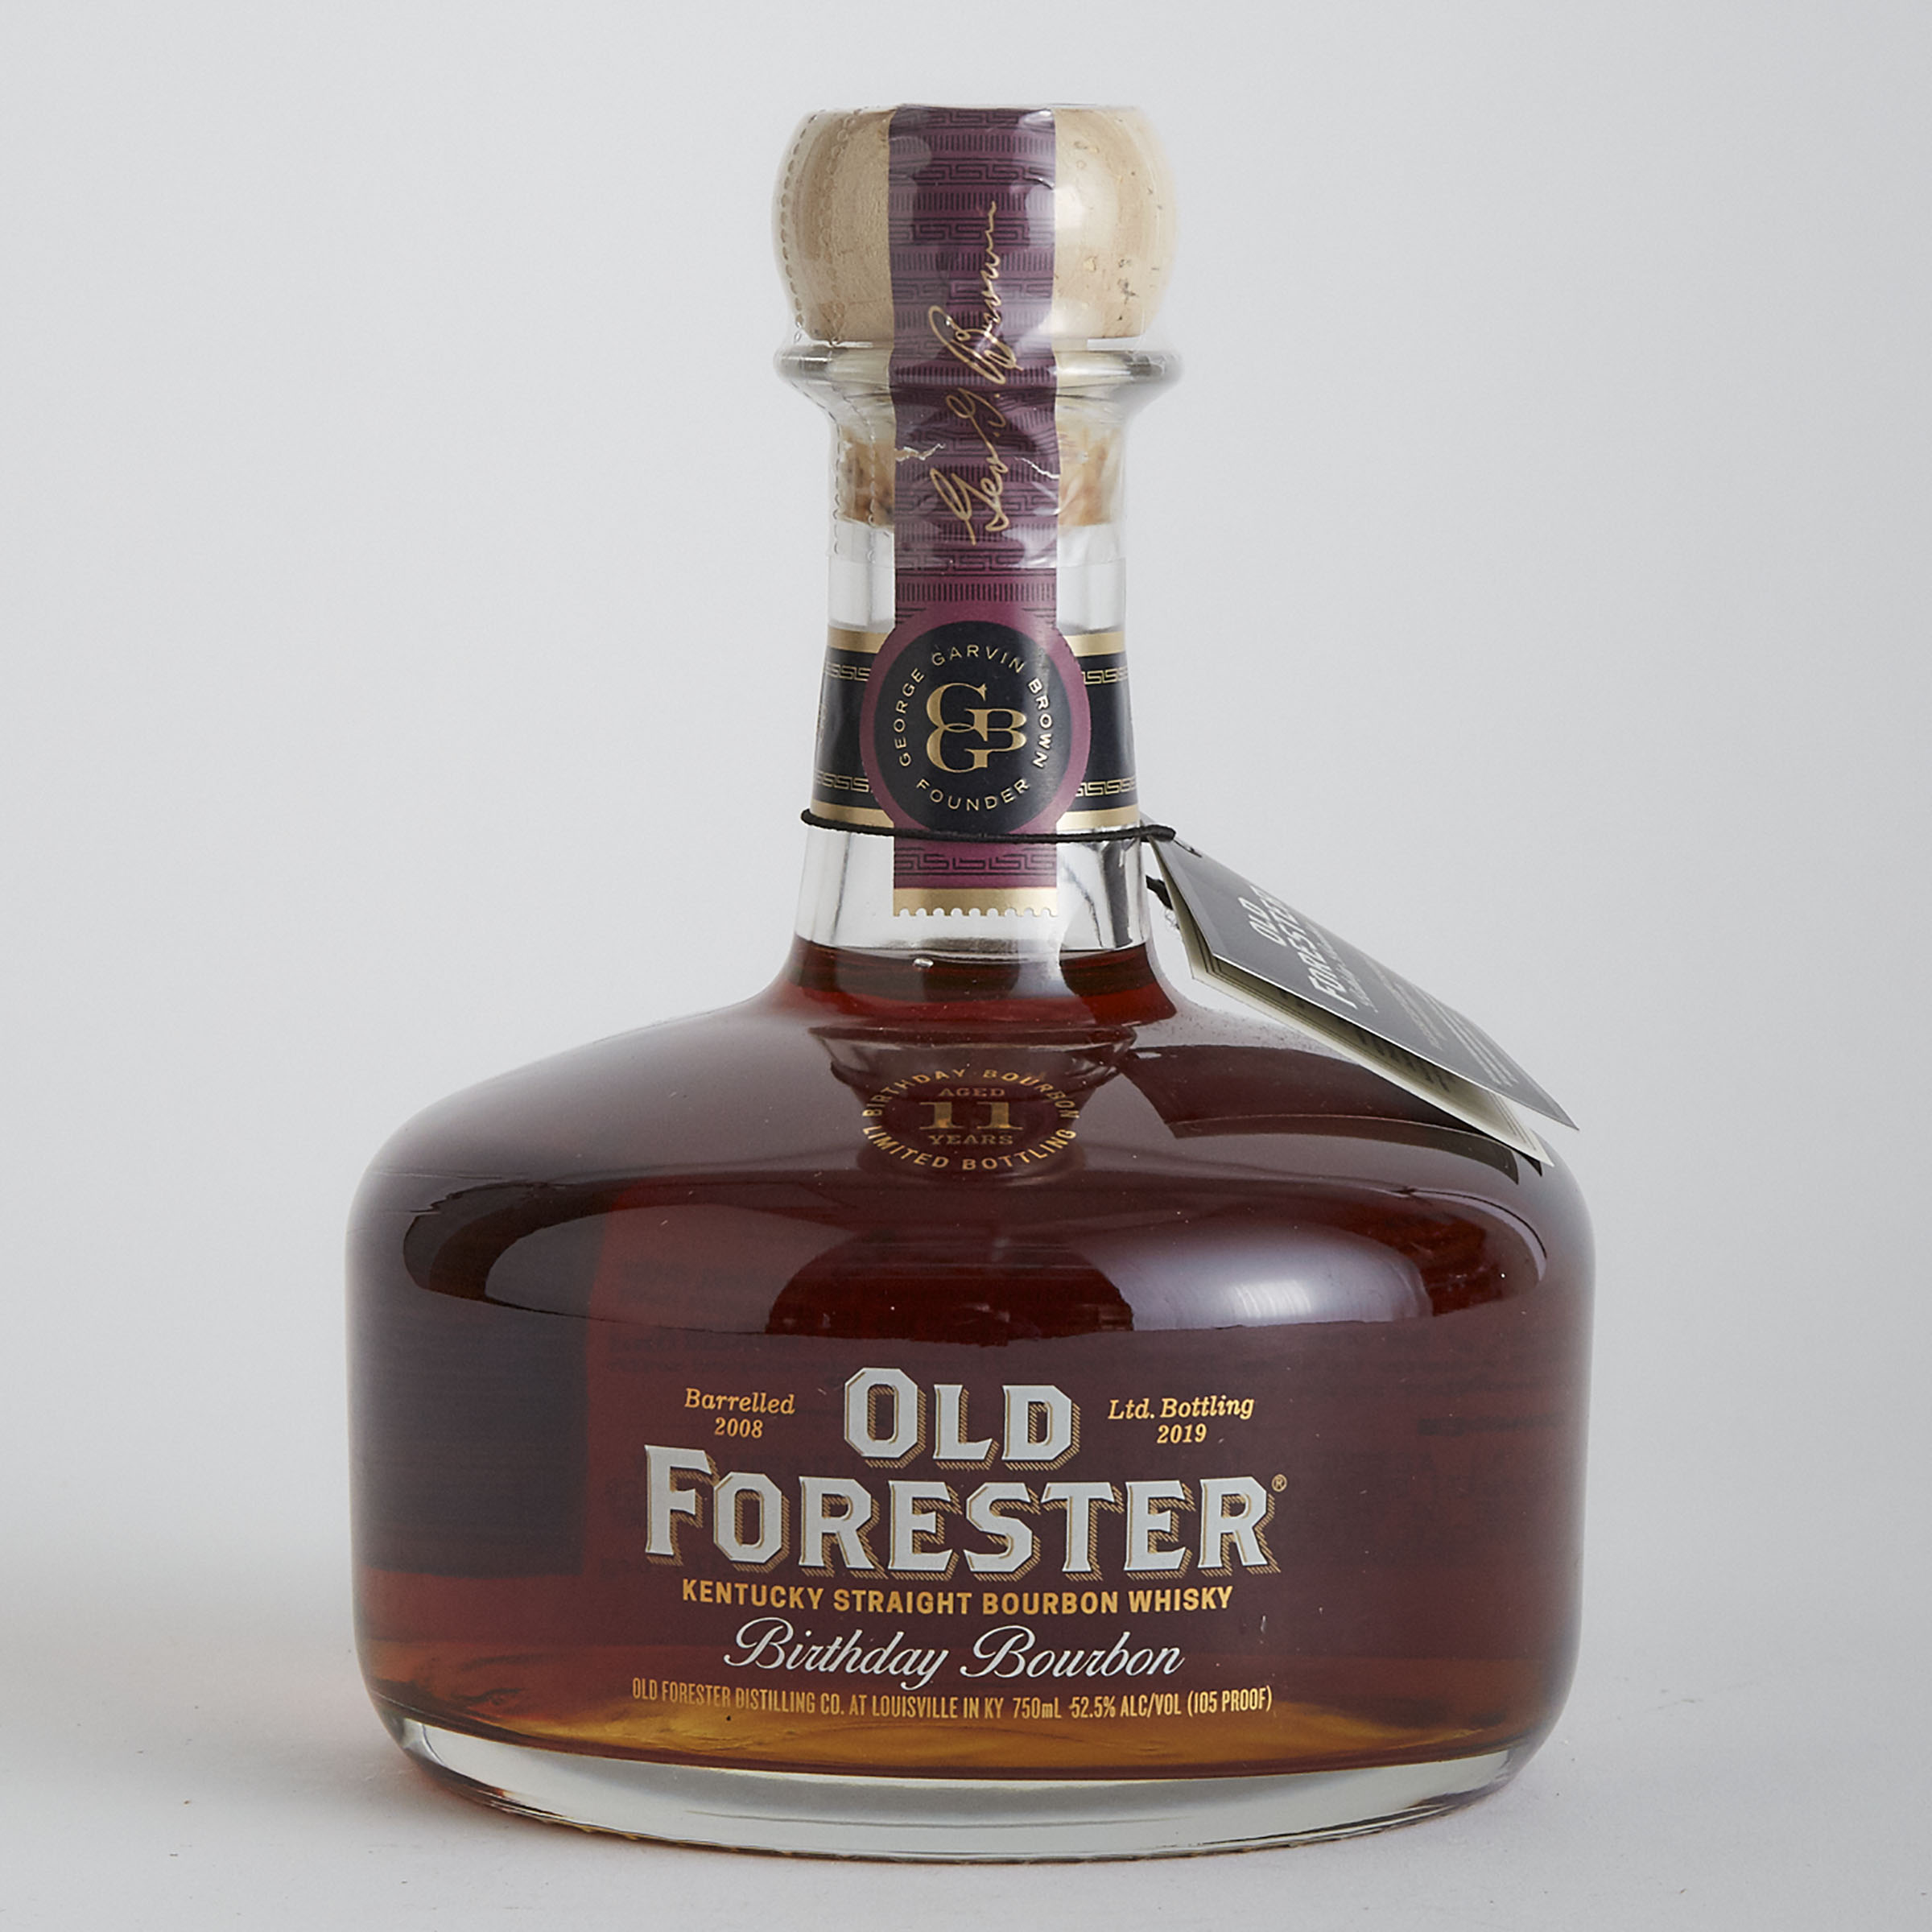 OLD FORESTER BIRTHDAY BOURBON KENTUCKY STRAIGHT BOURBON WHISKY 11 YEARS (ONE 750 ML)